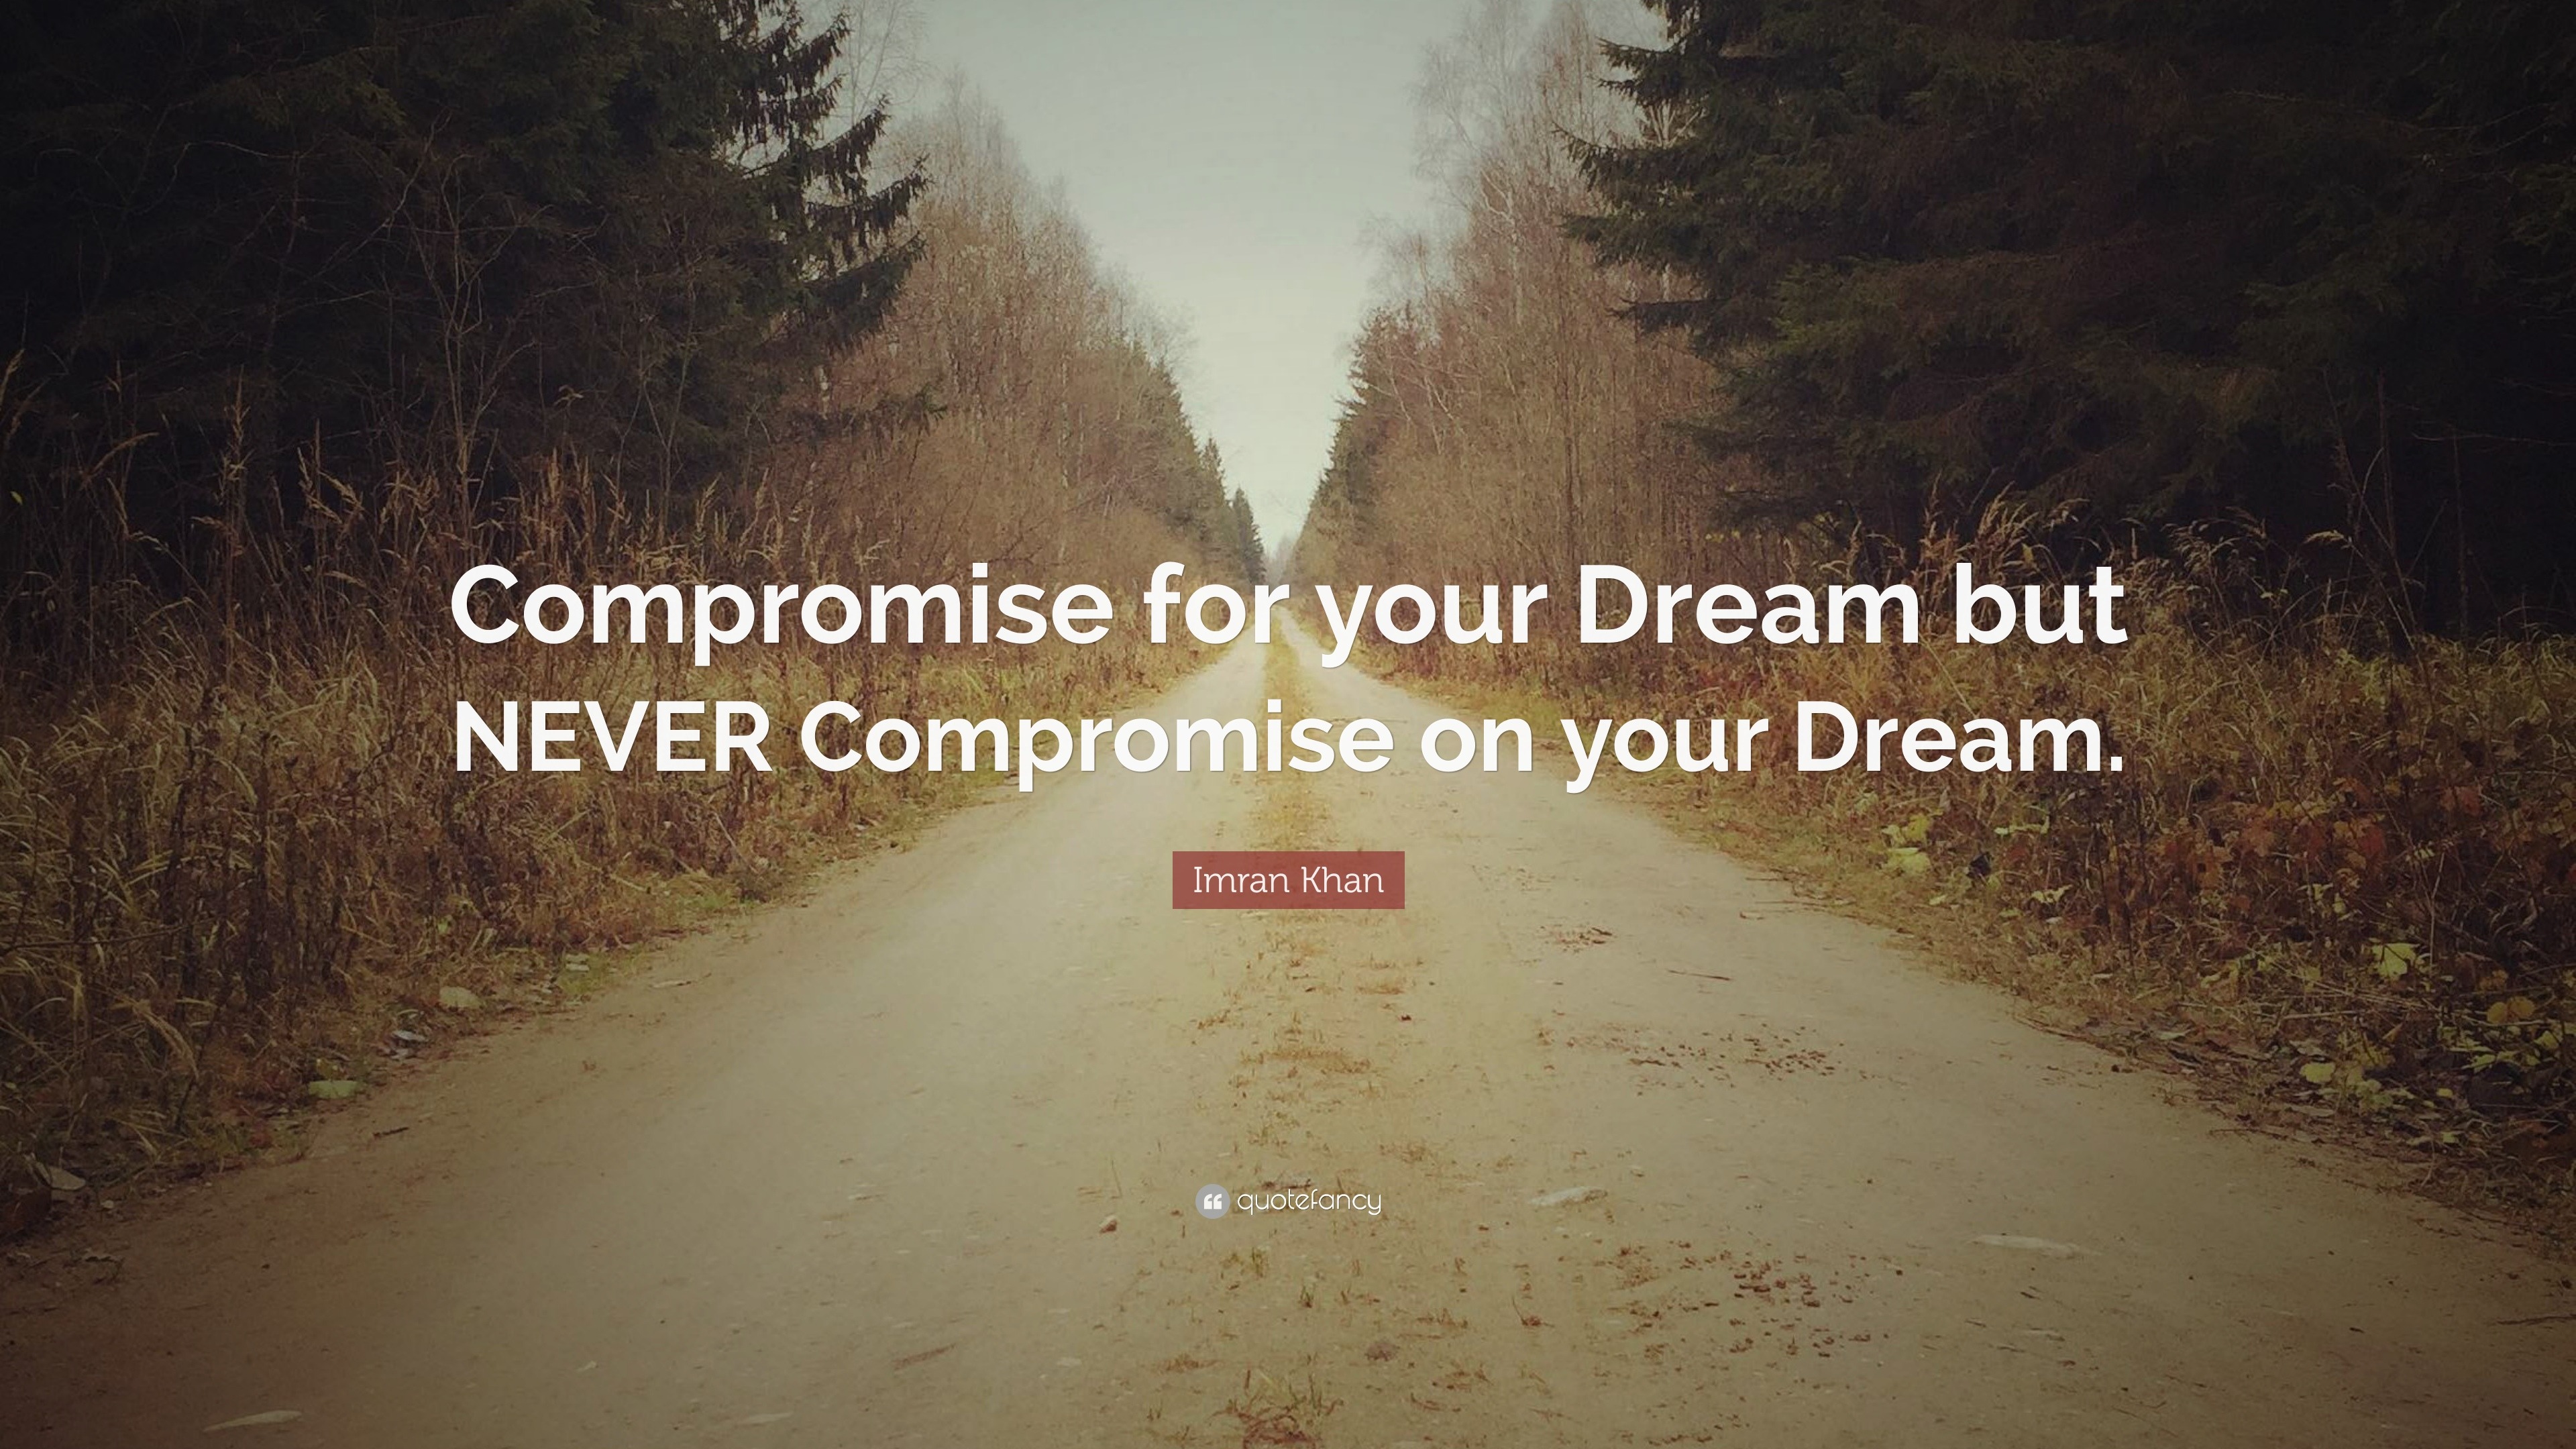 5 things you should never compromise in business